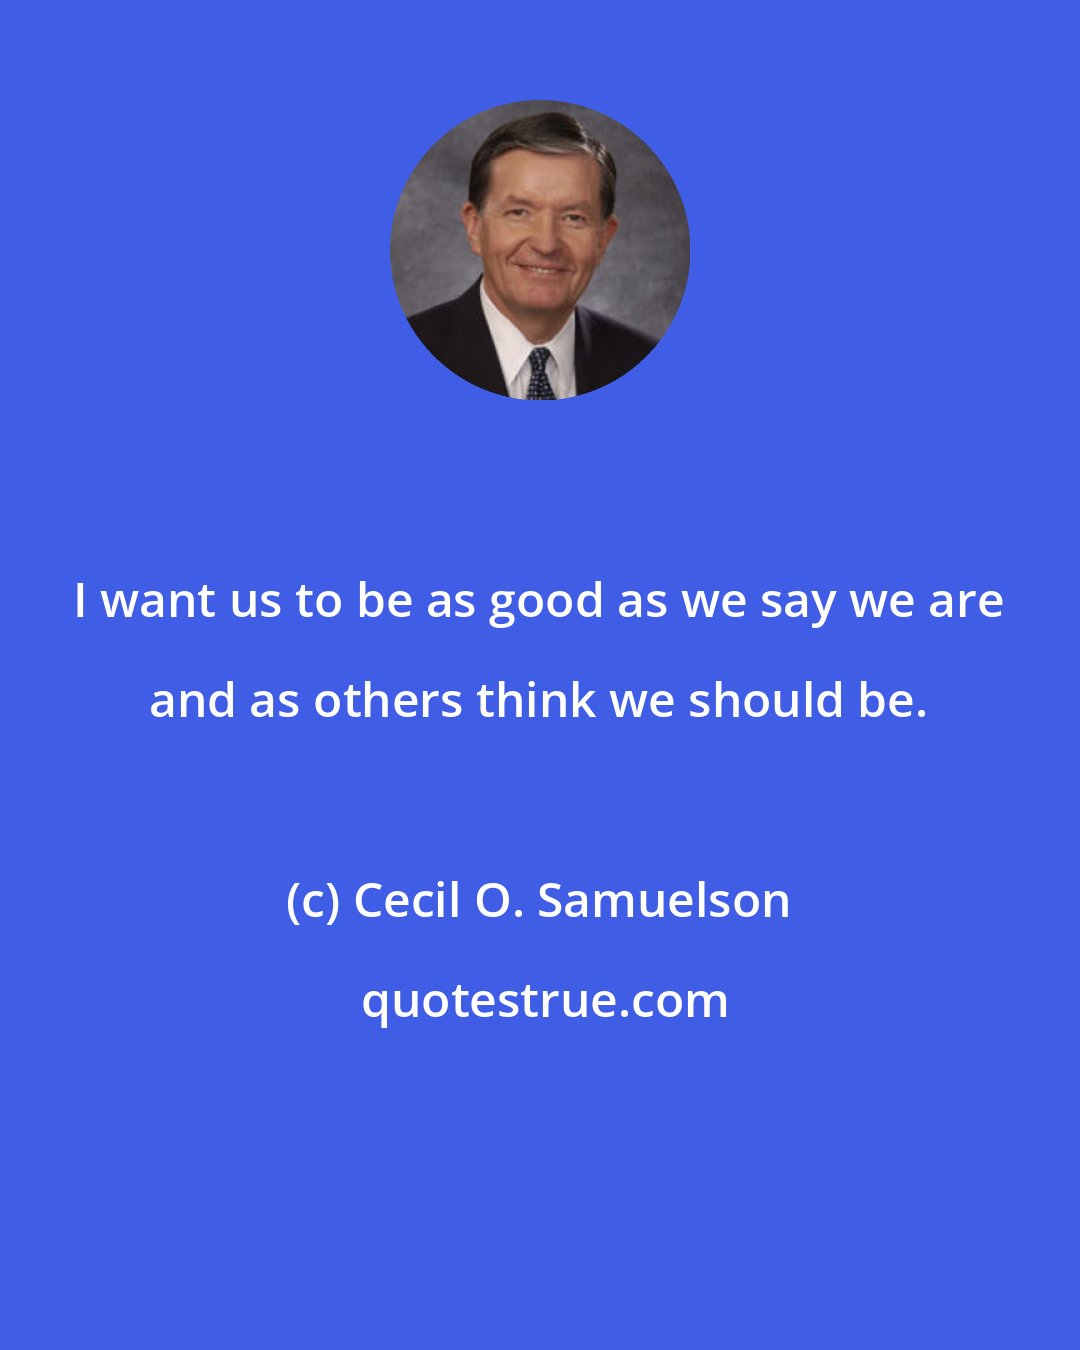 Cecil O. Samuelson: I want us to be as good as we say we are and as others think we should be.